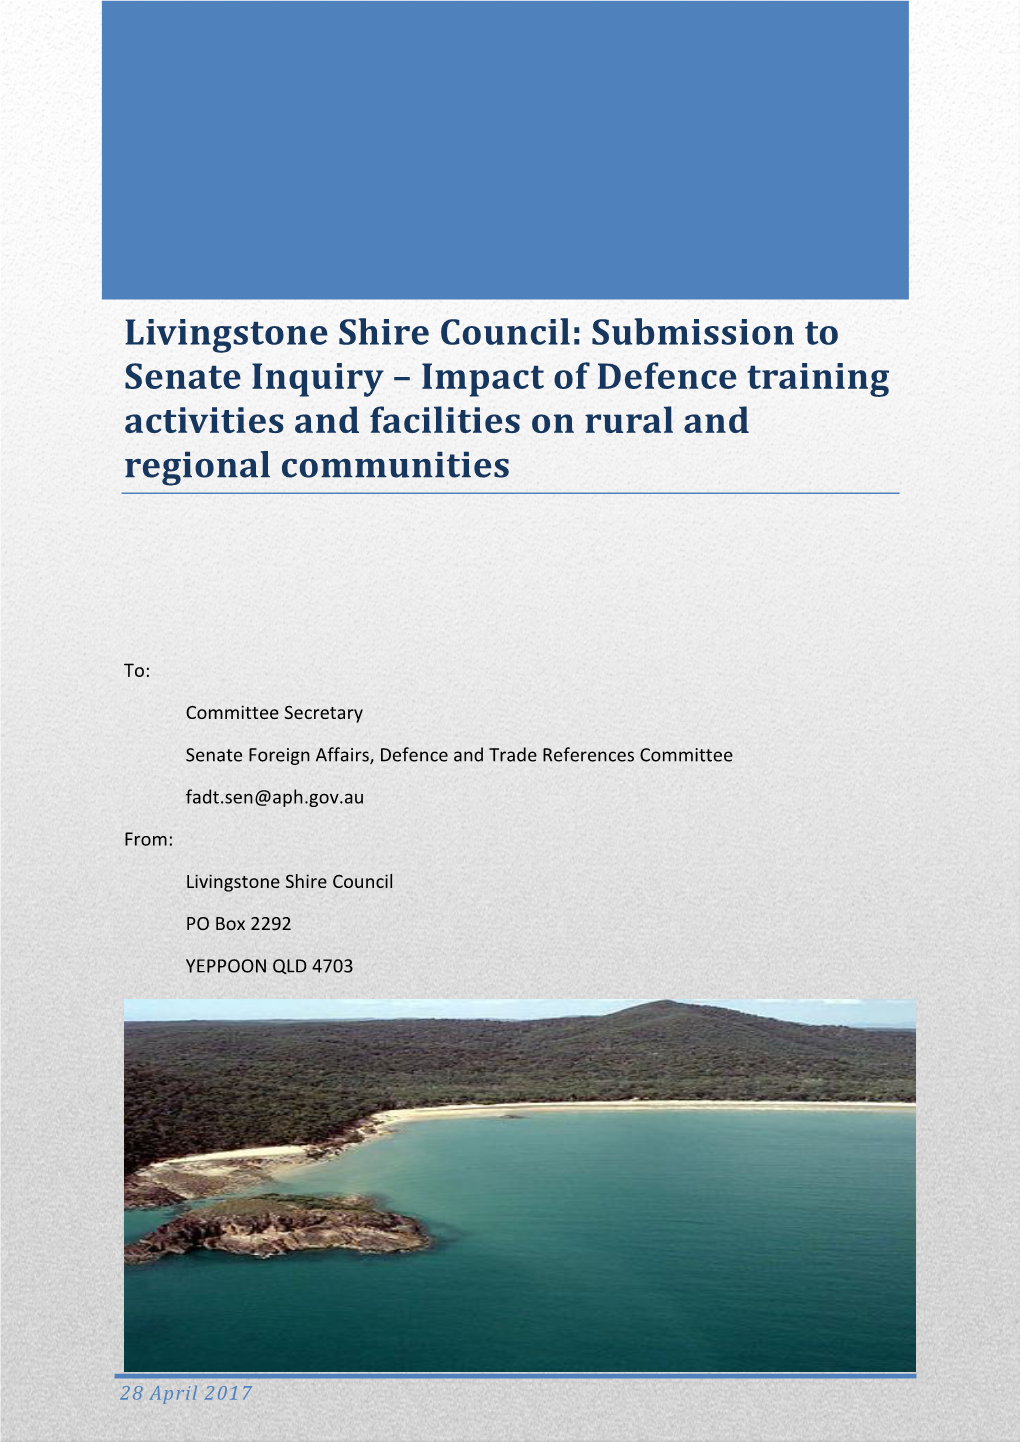 Livingstone Shire Council: Submission to Senate Inquiry – Impact of Defence Training Activities and Facilities on Rural and Regional Communities